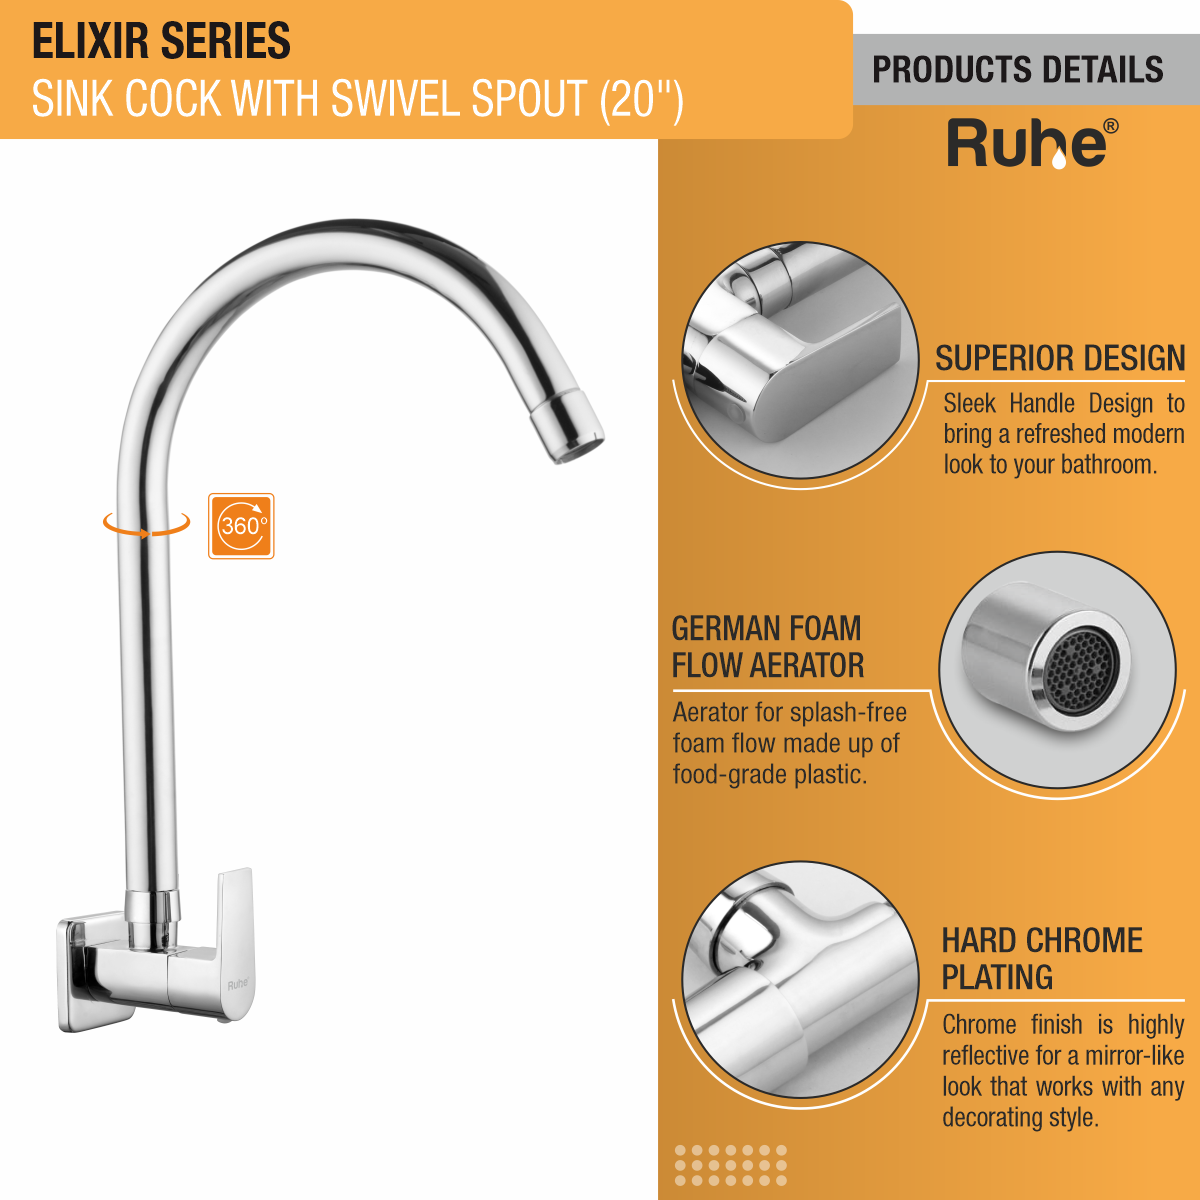 Elixir Sink Tap with Large (20 inches) Round Swivel Spout Faucet product details